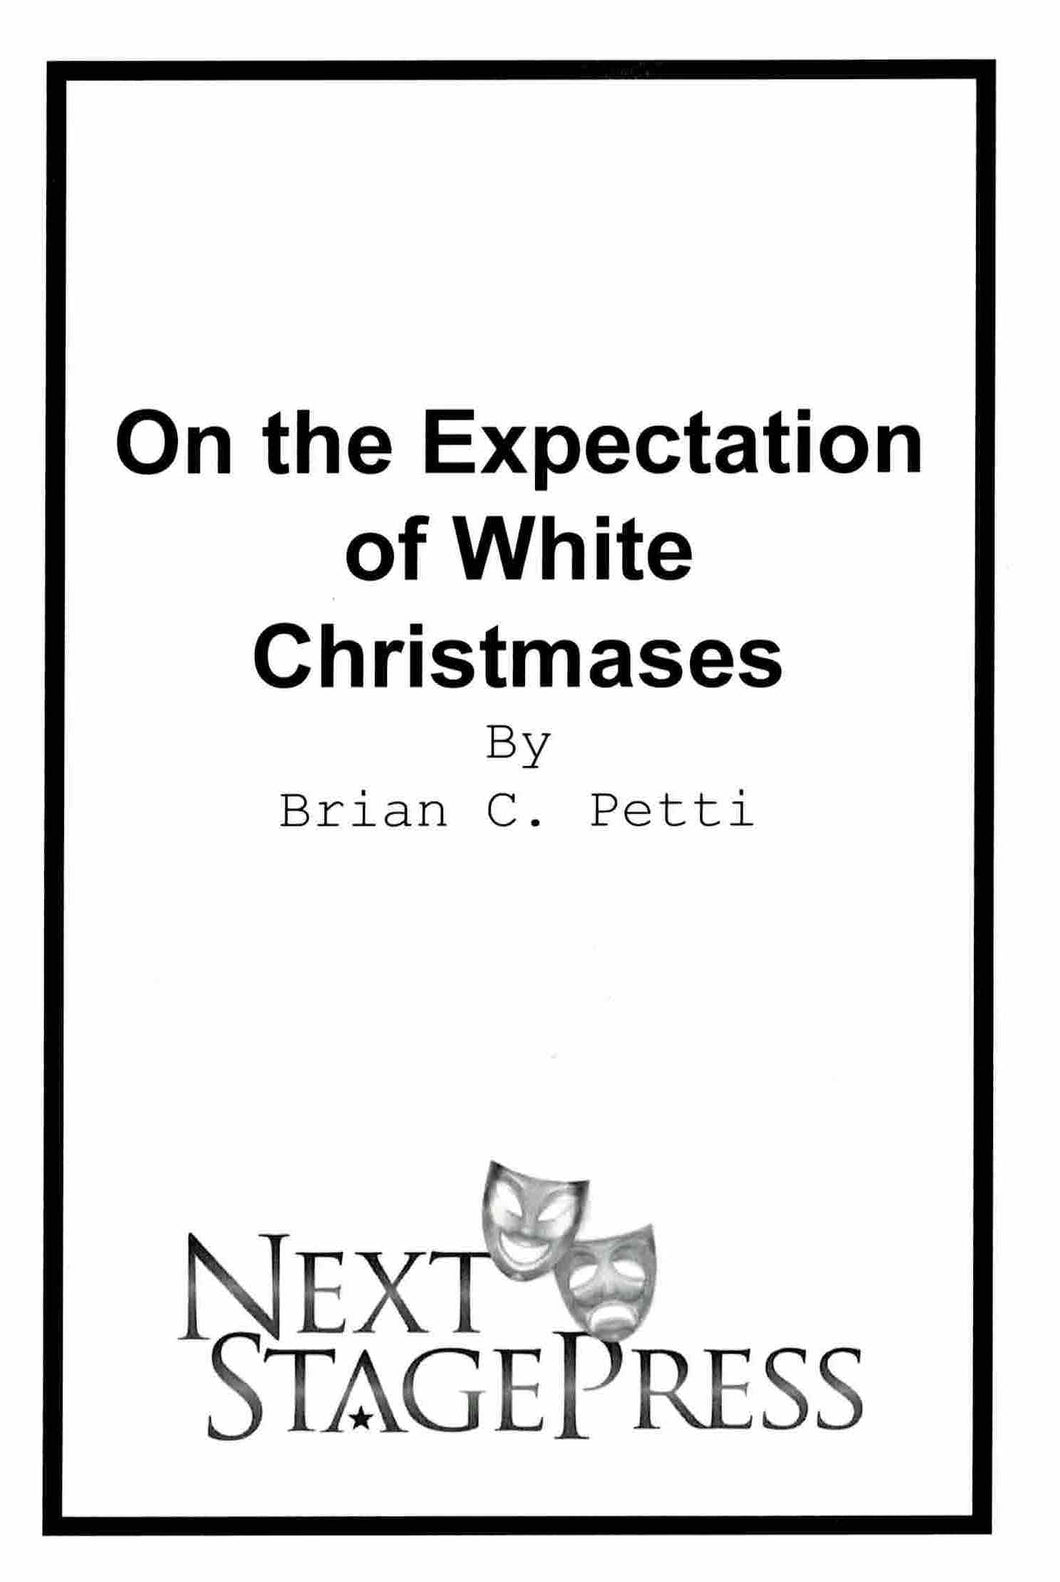 On the Expectations of White Christmases